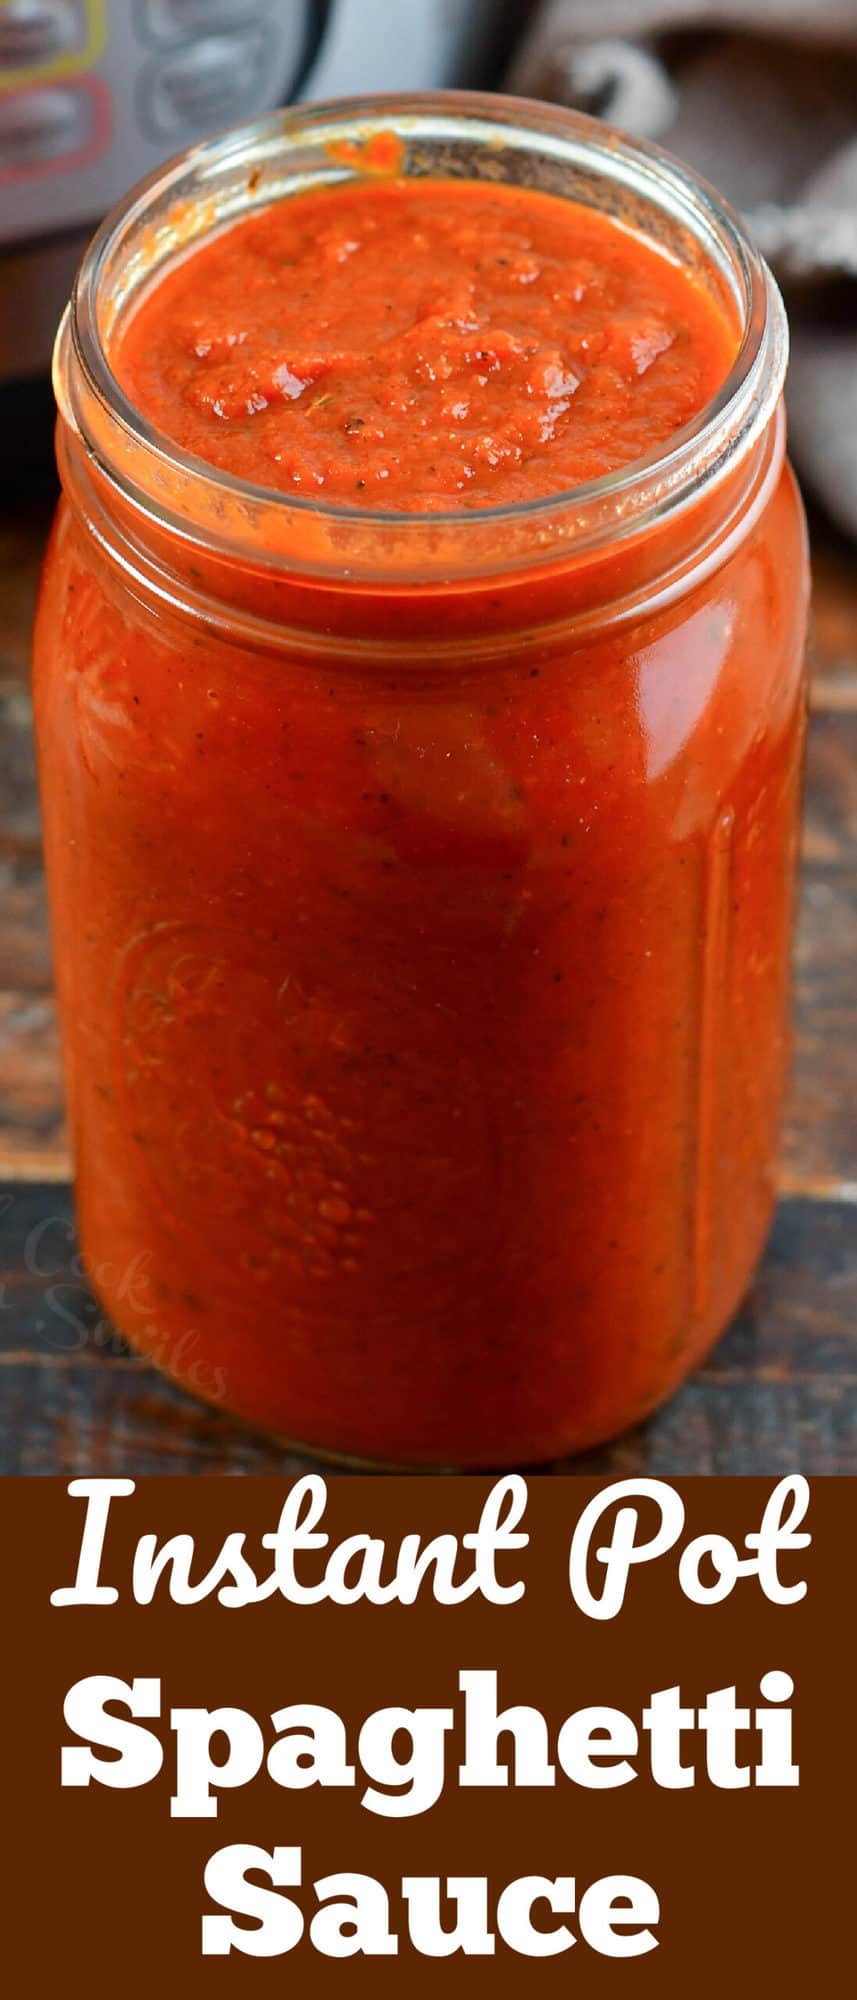 collage of spaghetti sauce in the jar with title below